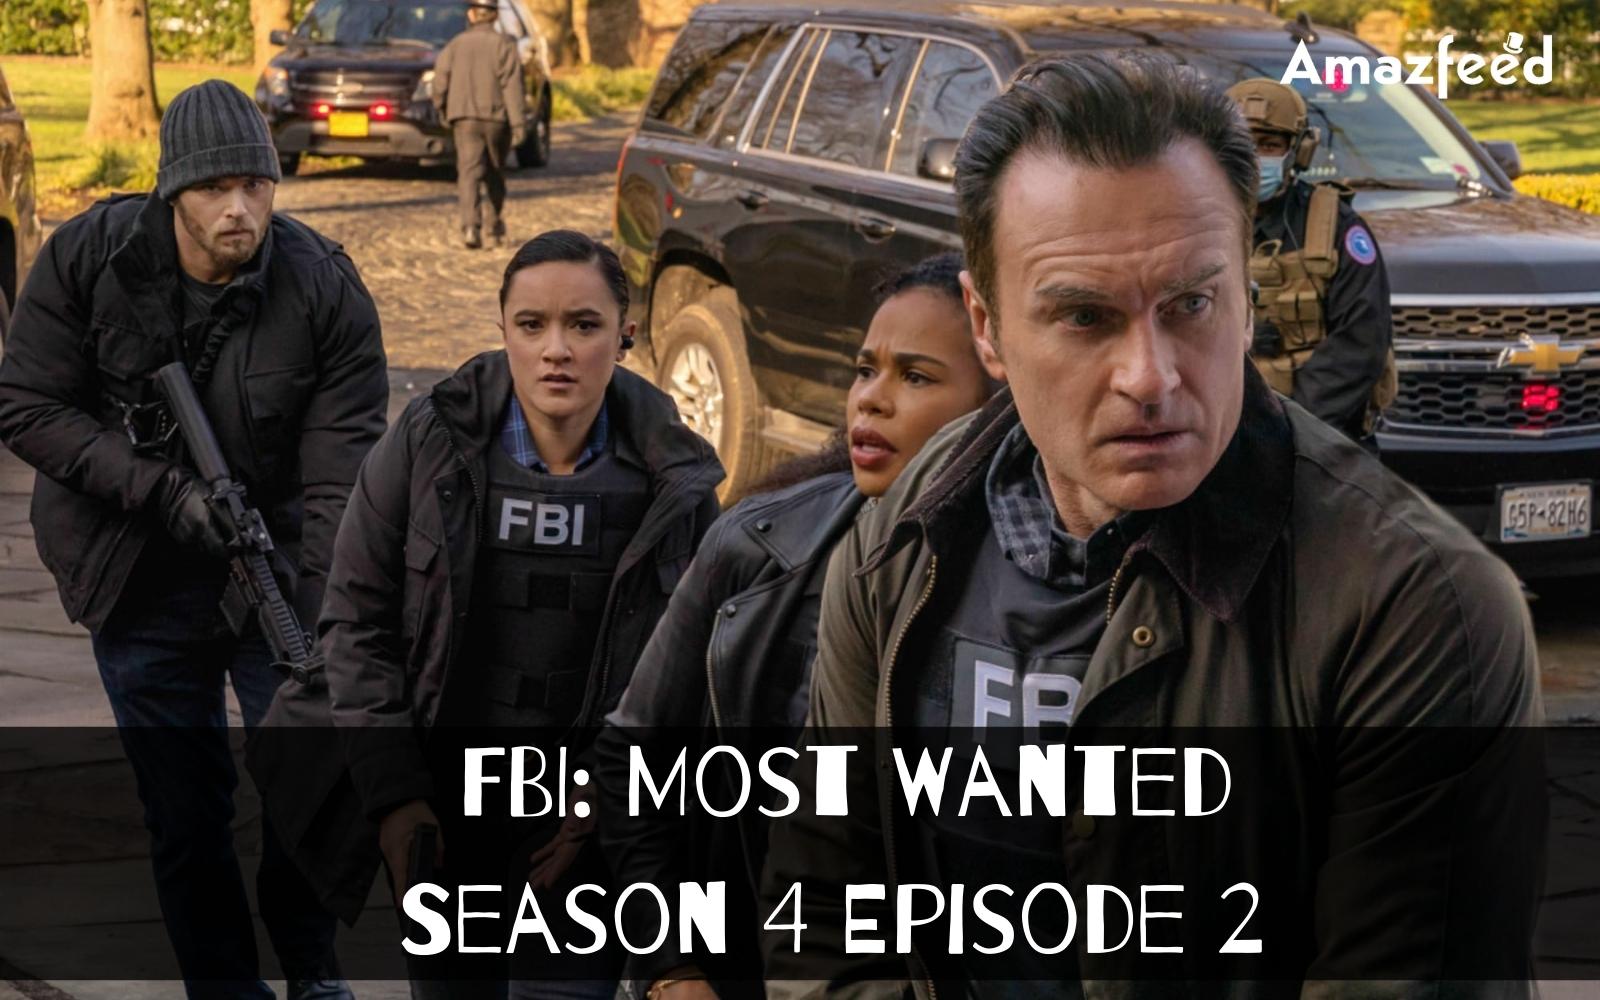 When Is FBI: Most Wanted Season 4 Episode 2 Coming Out?